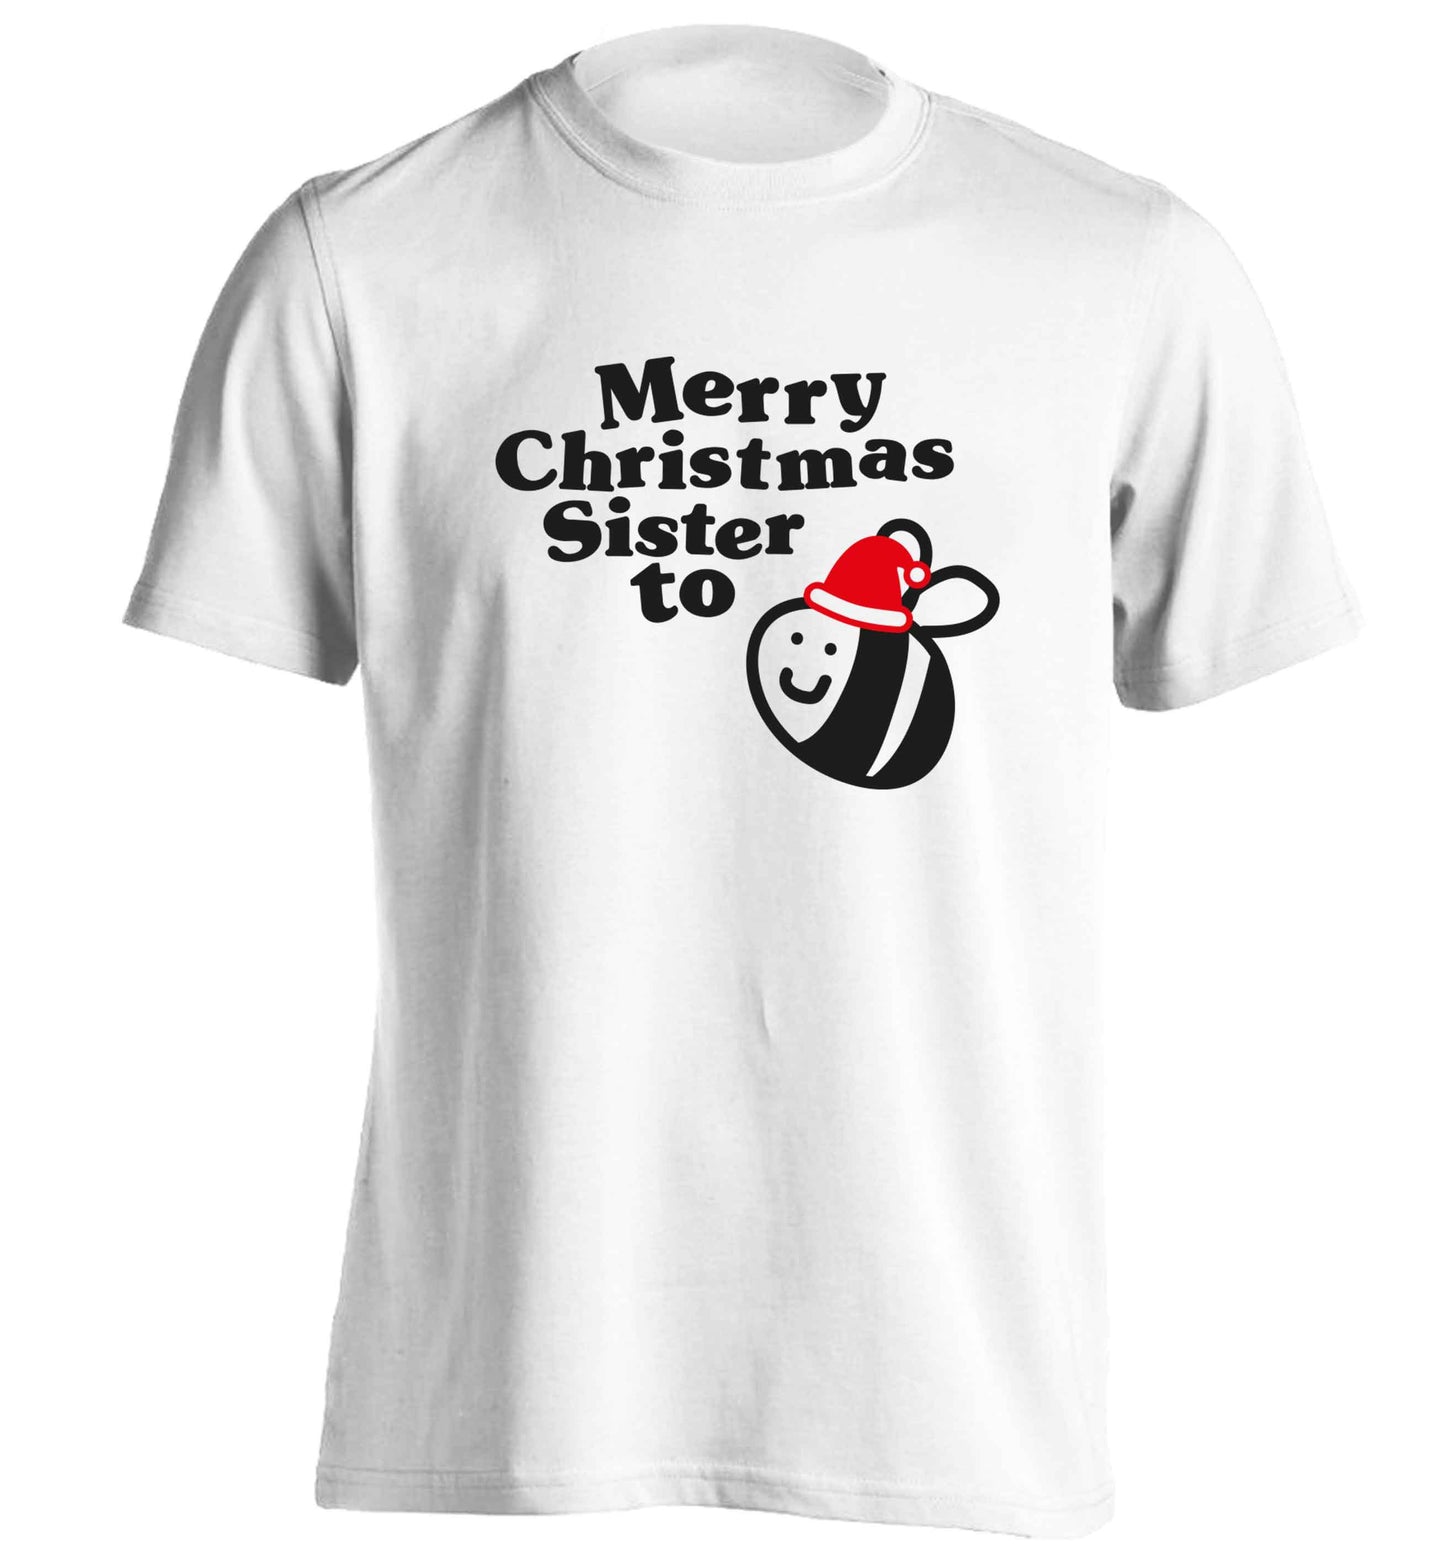 Merry Christmas sister to be adults unisex white Tshirt 2XL